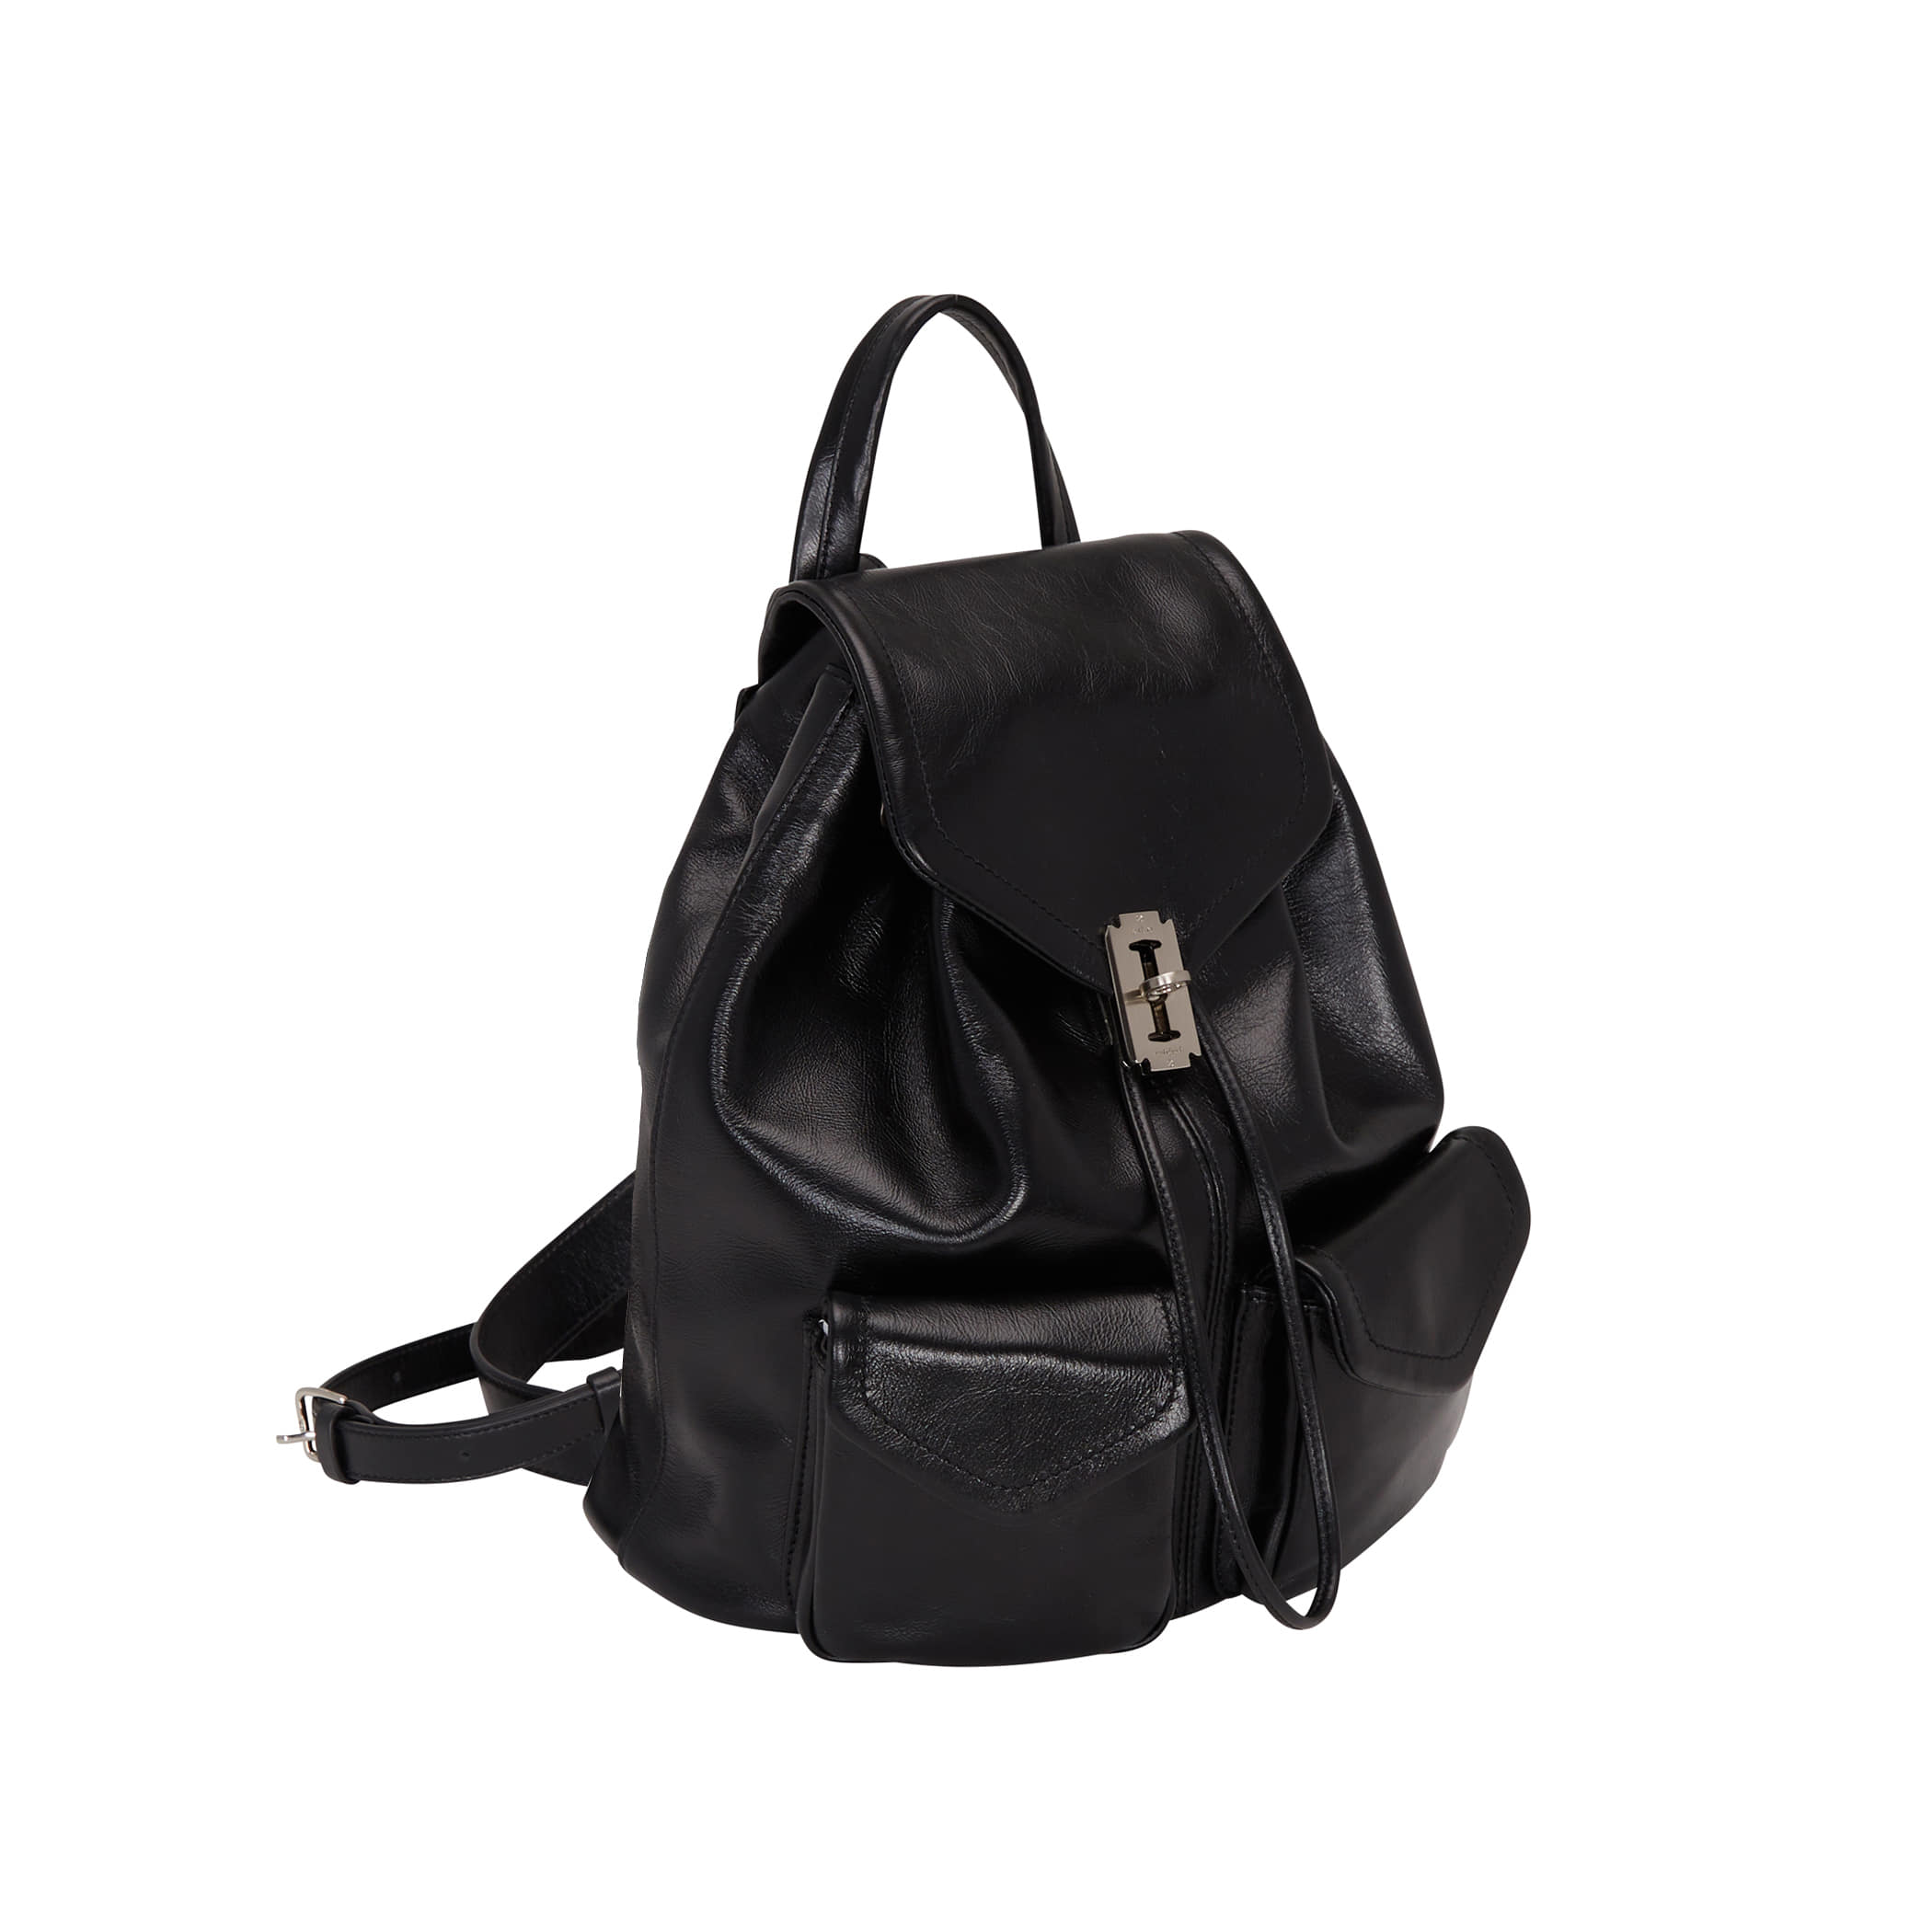 Occam Doux double pocket Backpack M (오캄 두 더블 포켓 백팩 미듐) Black